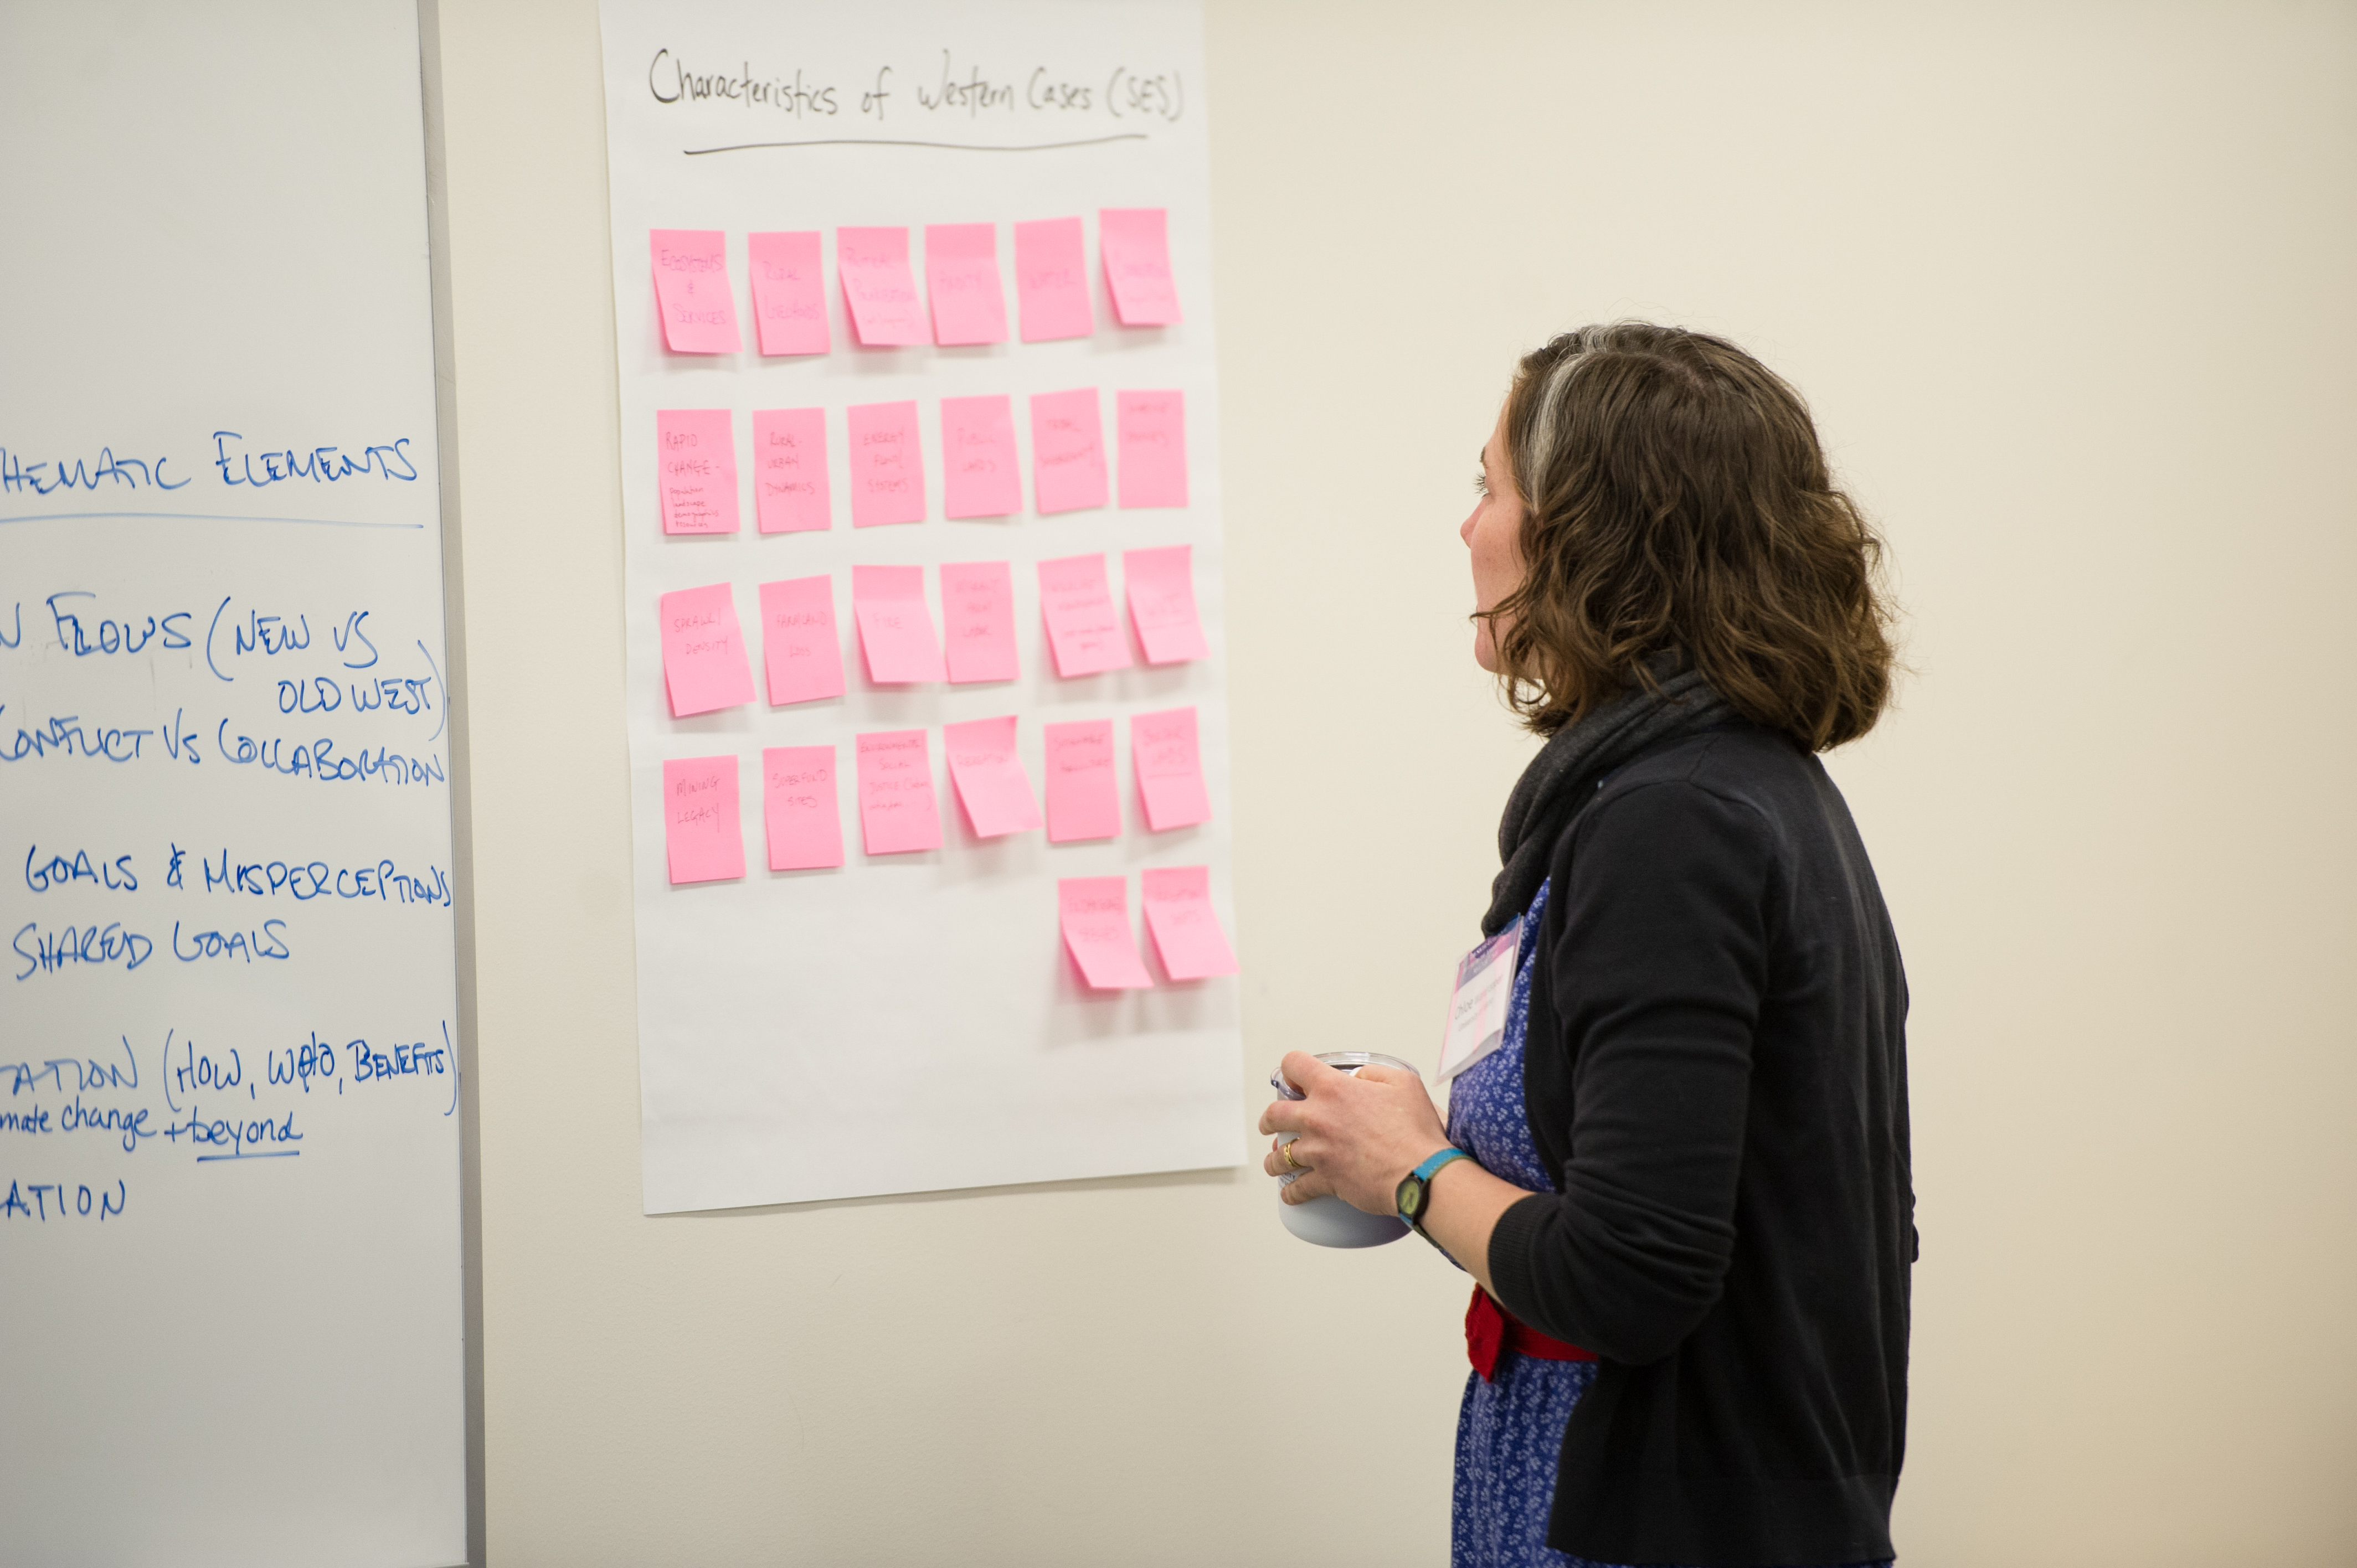 One woman looking at paper stuck to wall that has a grid of colored sticky notes